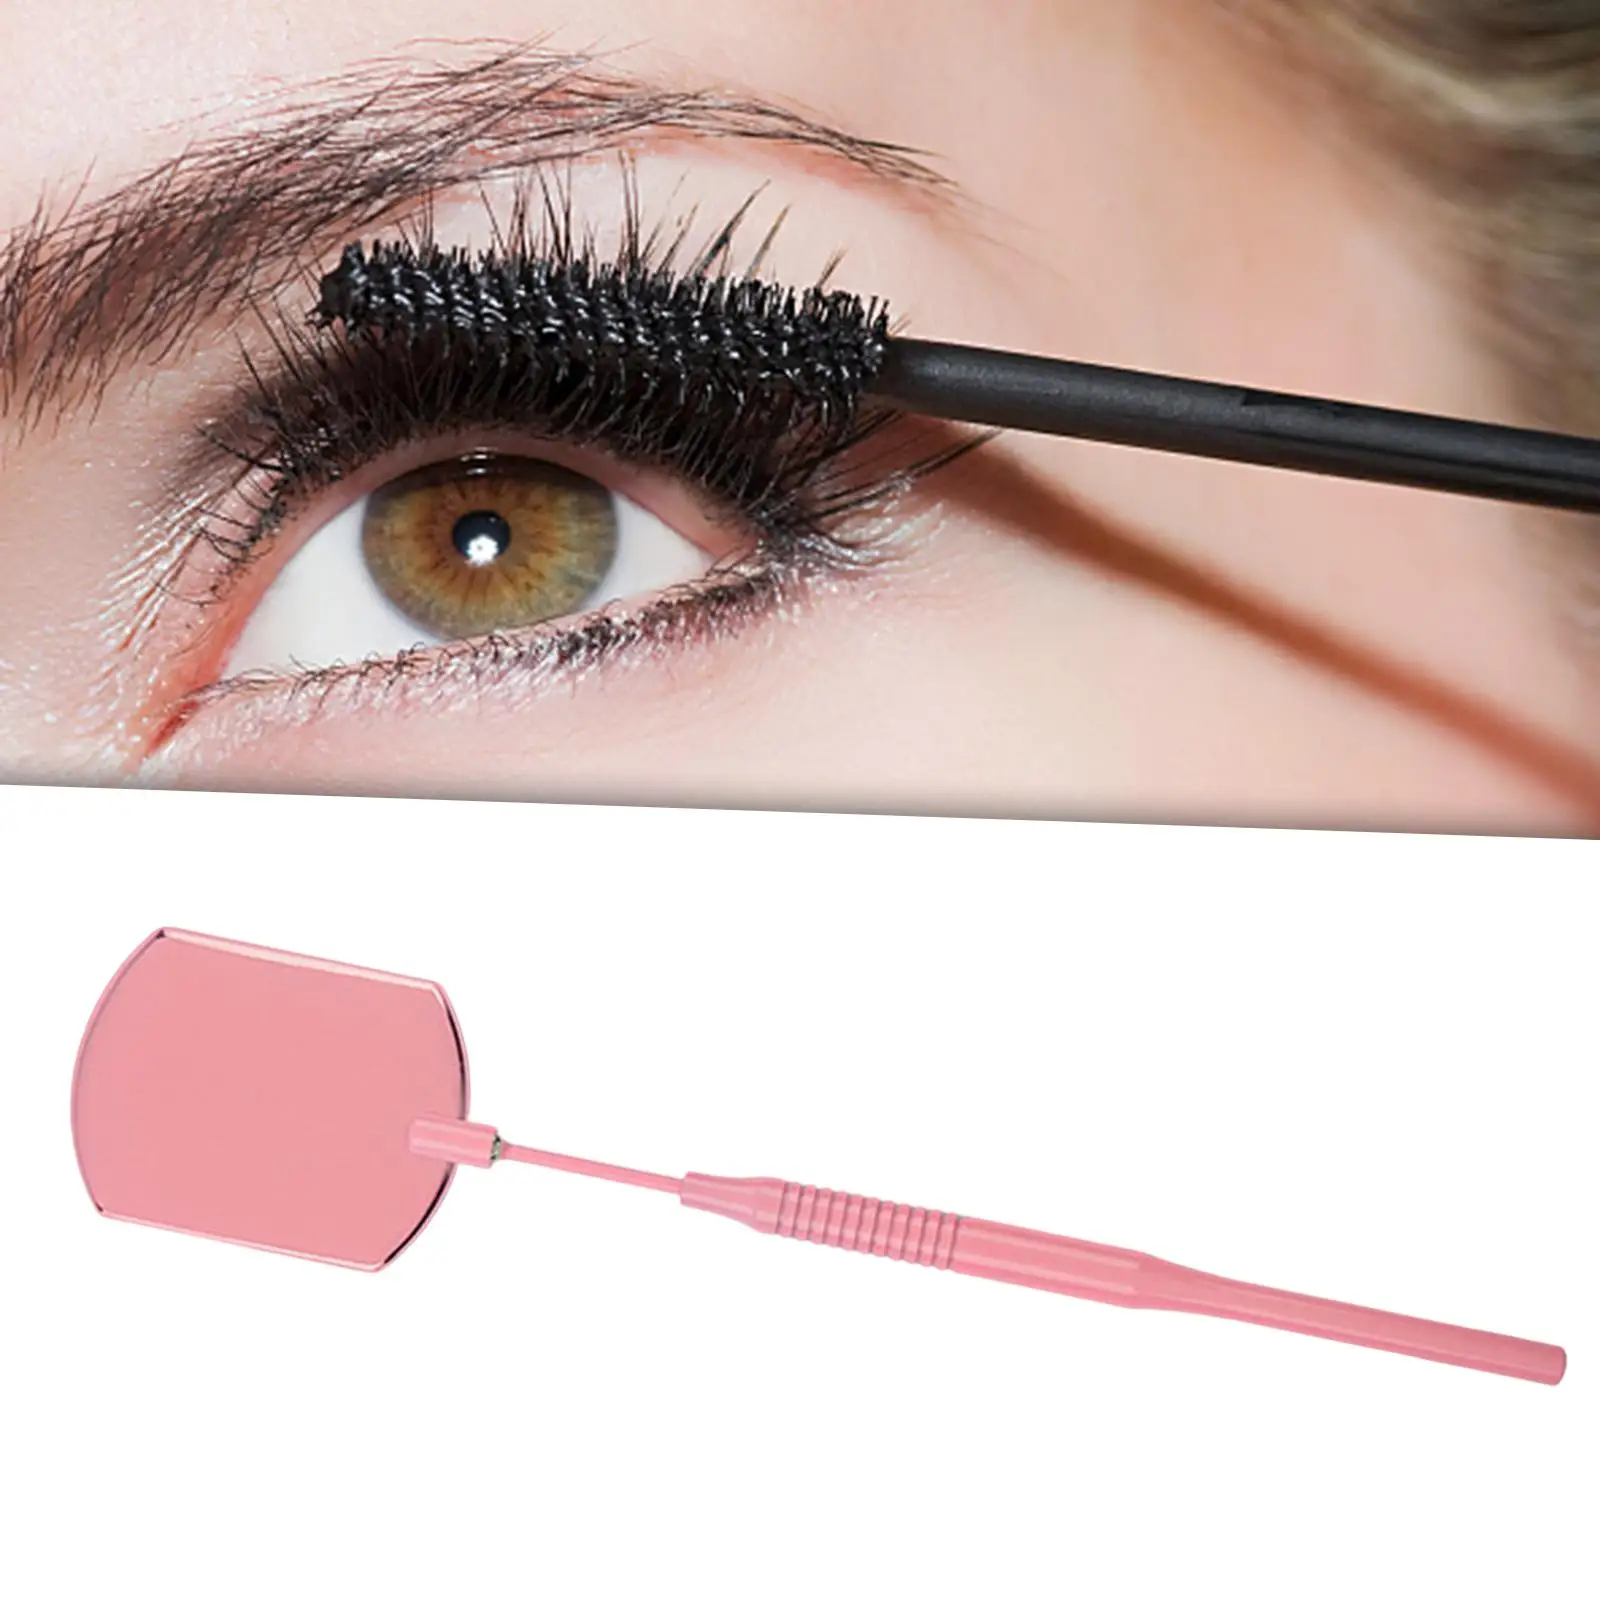 Eyelash Mirror Lash Tool Square Mirror , Must Have Tool for Lash Technicians Comfortable to Hold Professional Exquisite